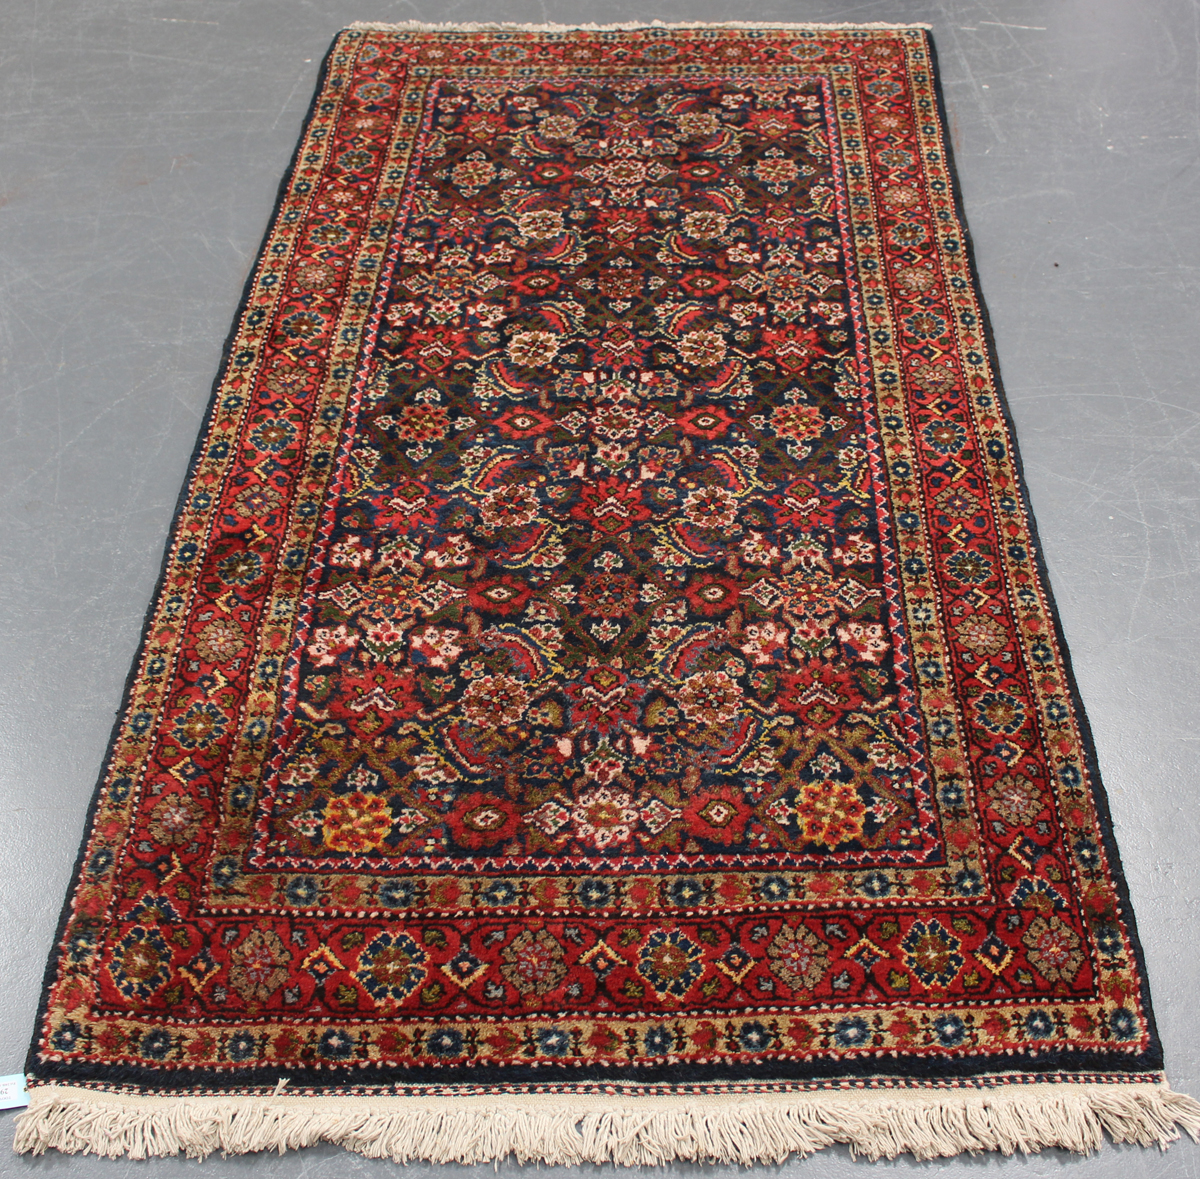 A Hamadan rug, North-west Persia, mid-20th century, the midnight blue field with an overall herati